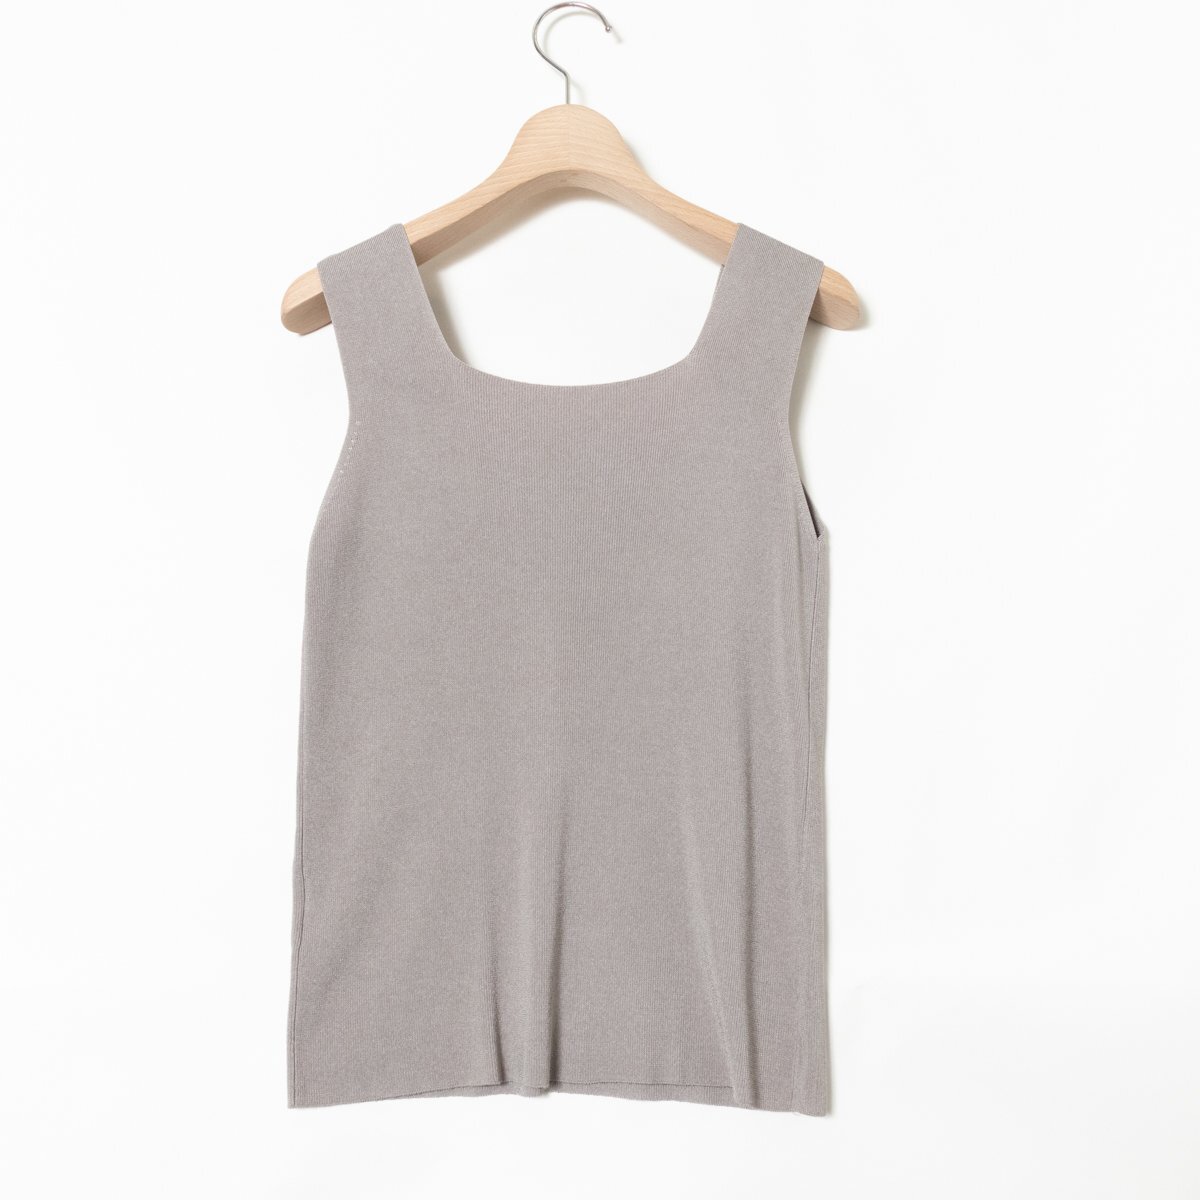  mail service 0 Super Beauty super view ti spangled attaching no sleeve tank top 42 rayon gray beautiful . casual 